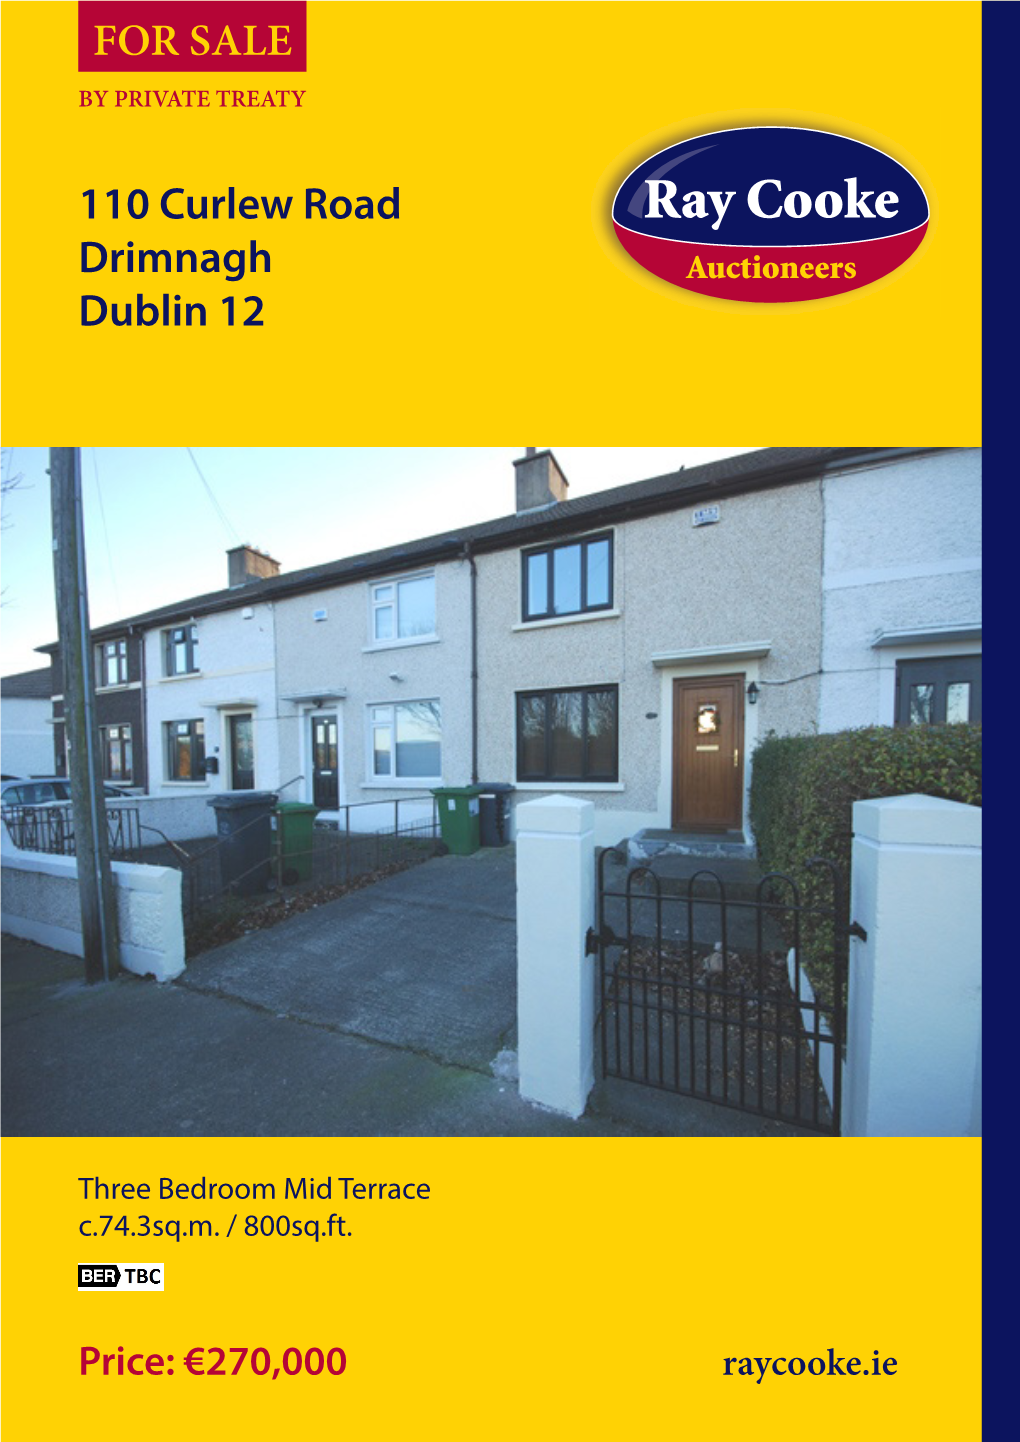 110 Curlew Road Drimnagh Dublin 12 for SALE